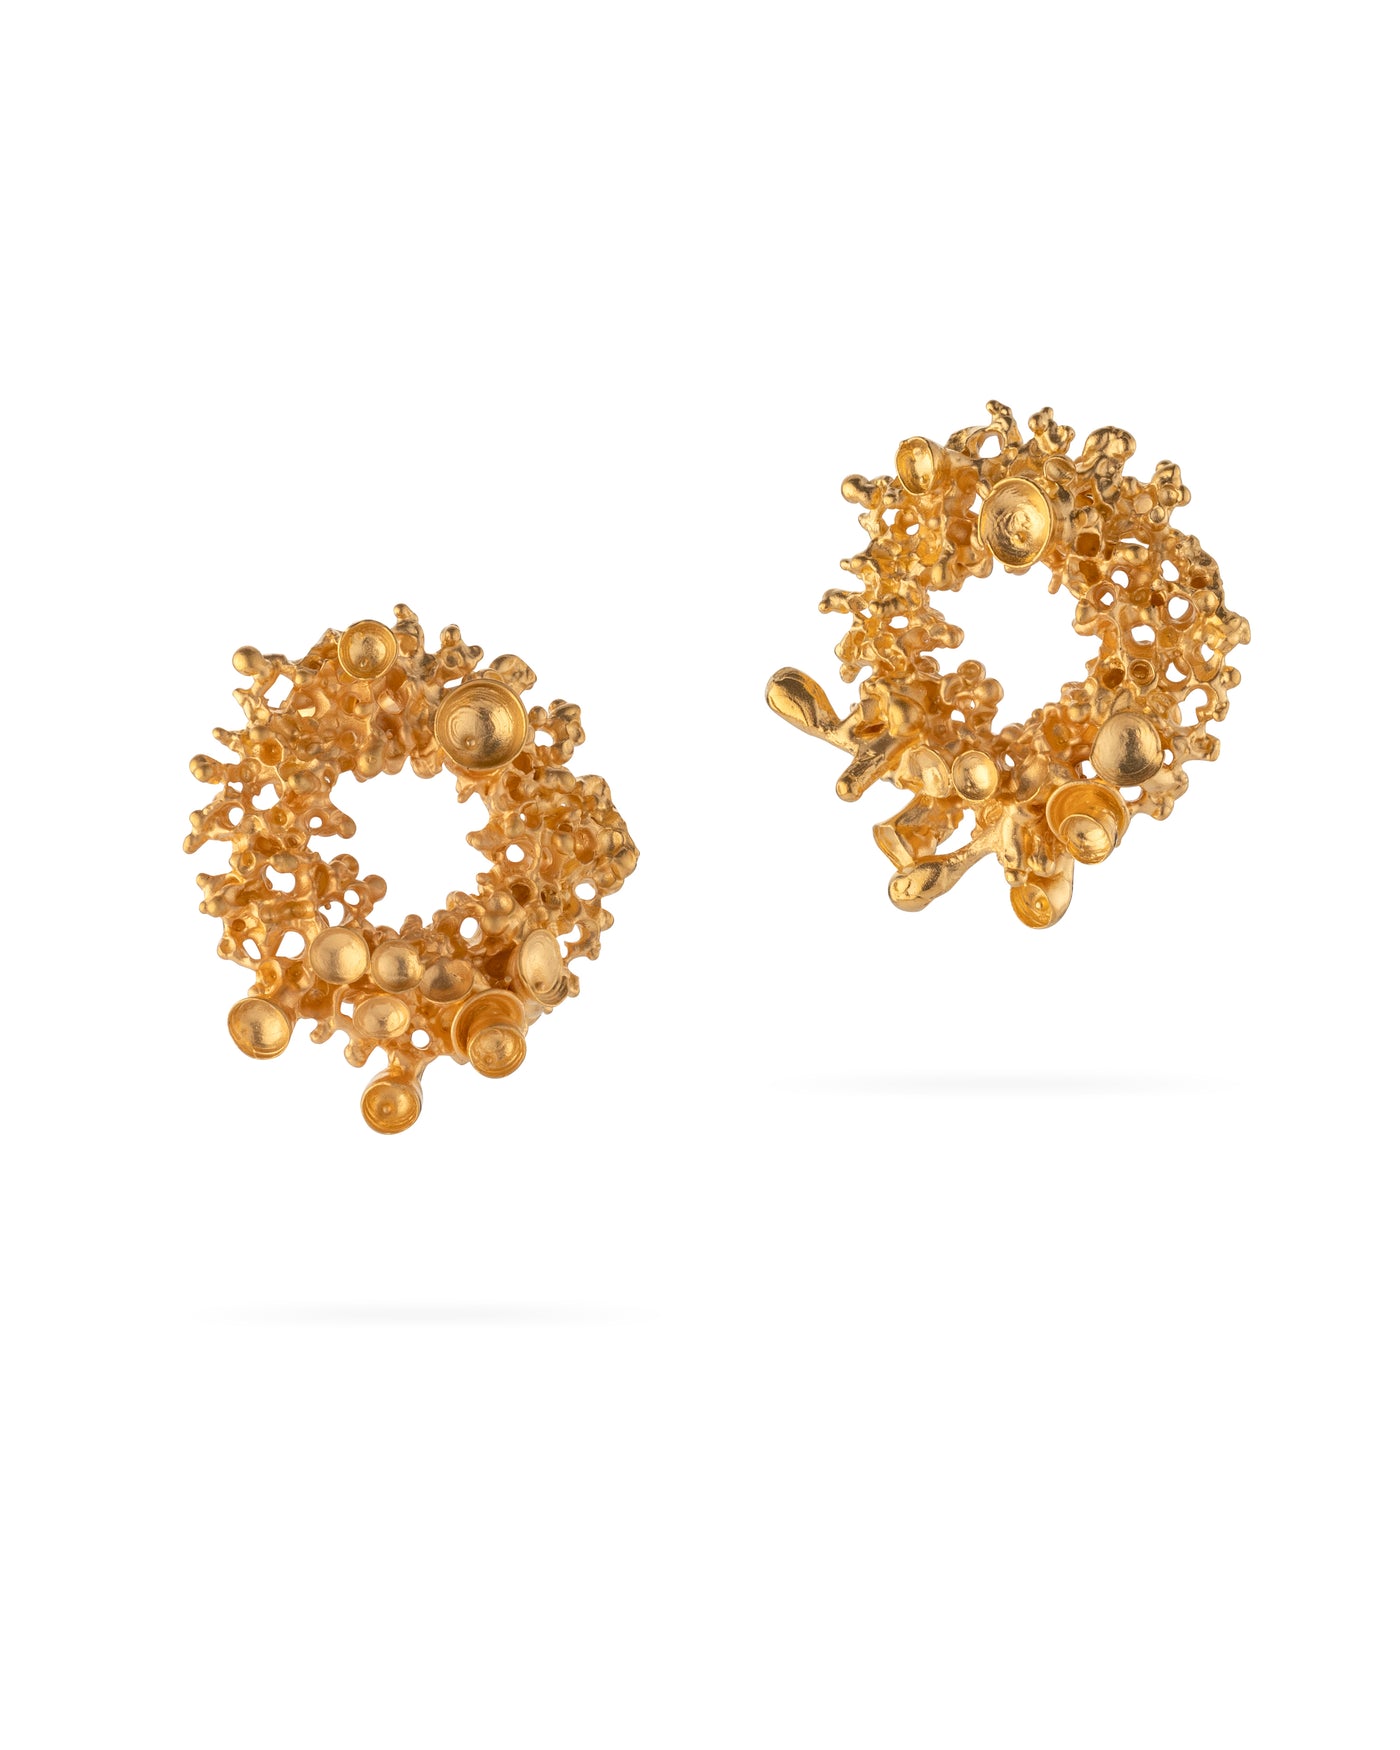 Gold earrings "CORAL WAVE"